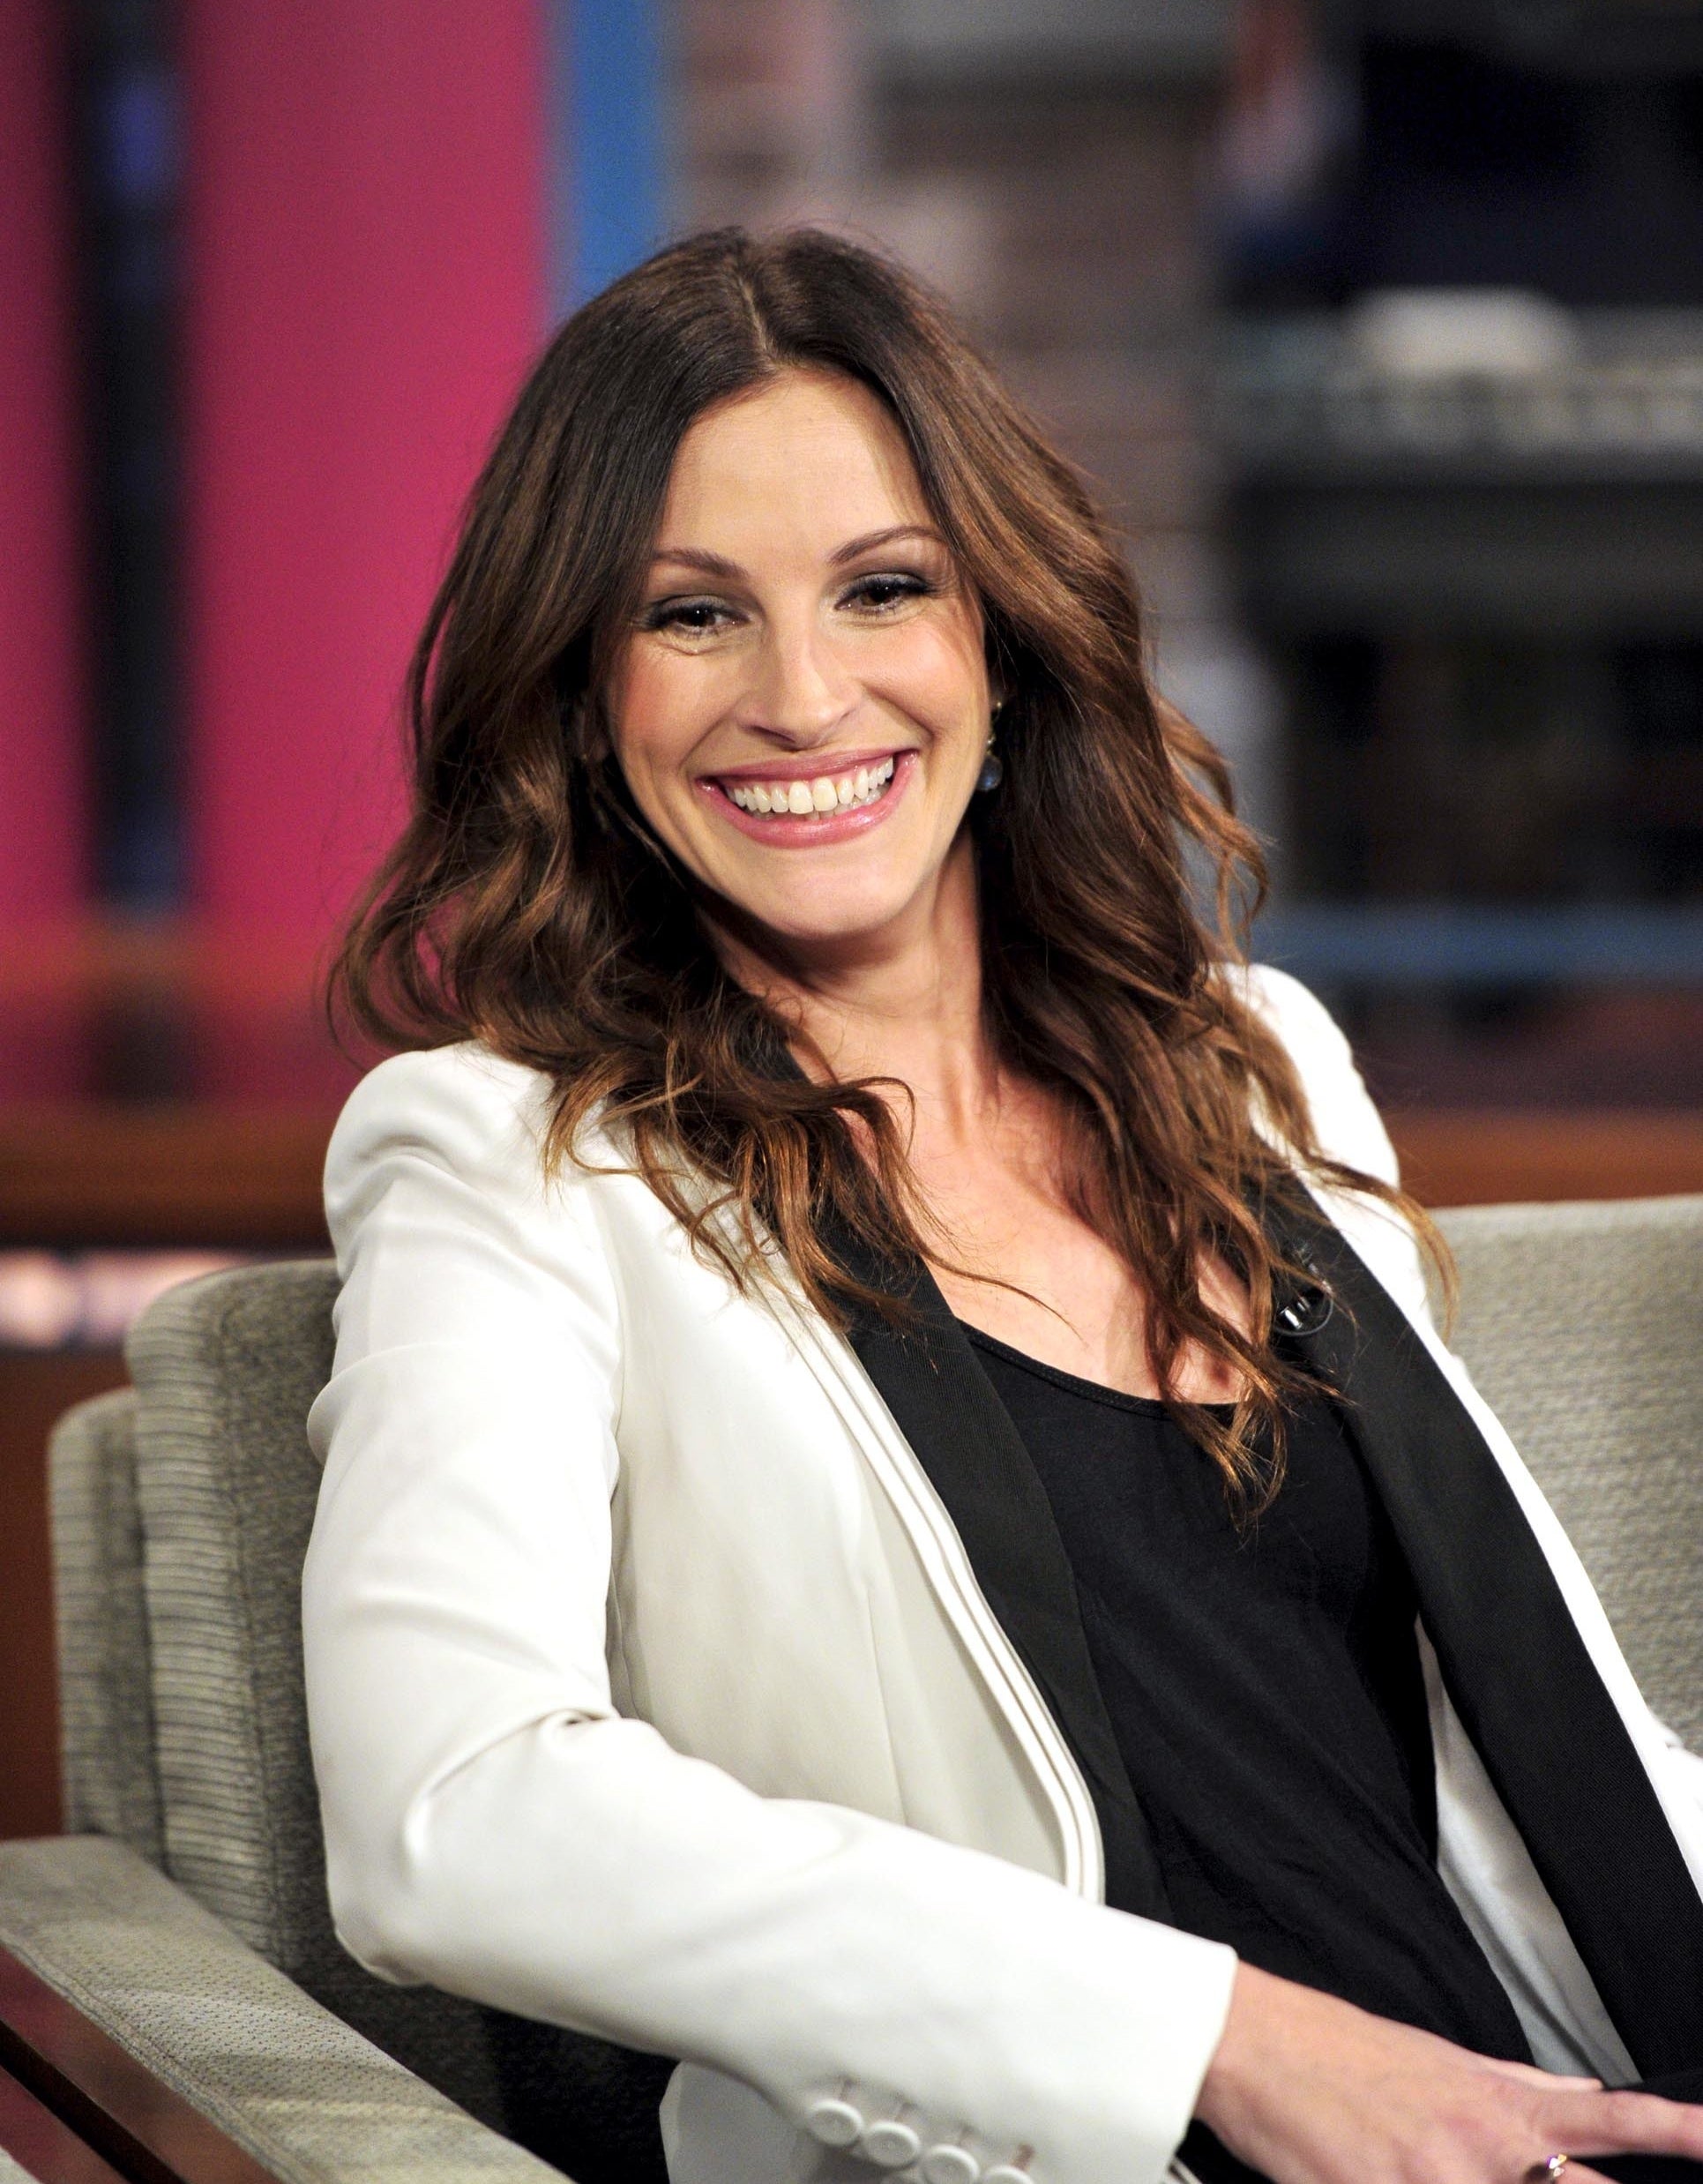 Julia Roberts smiling during a talk show appearance in 2010